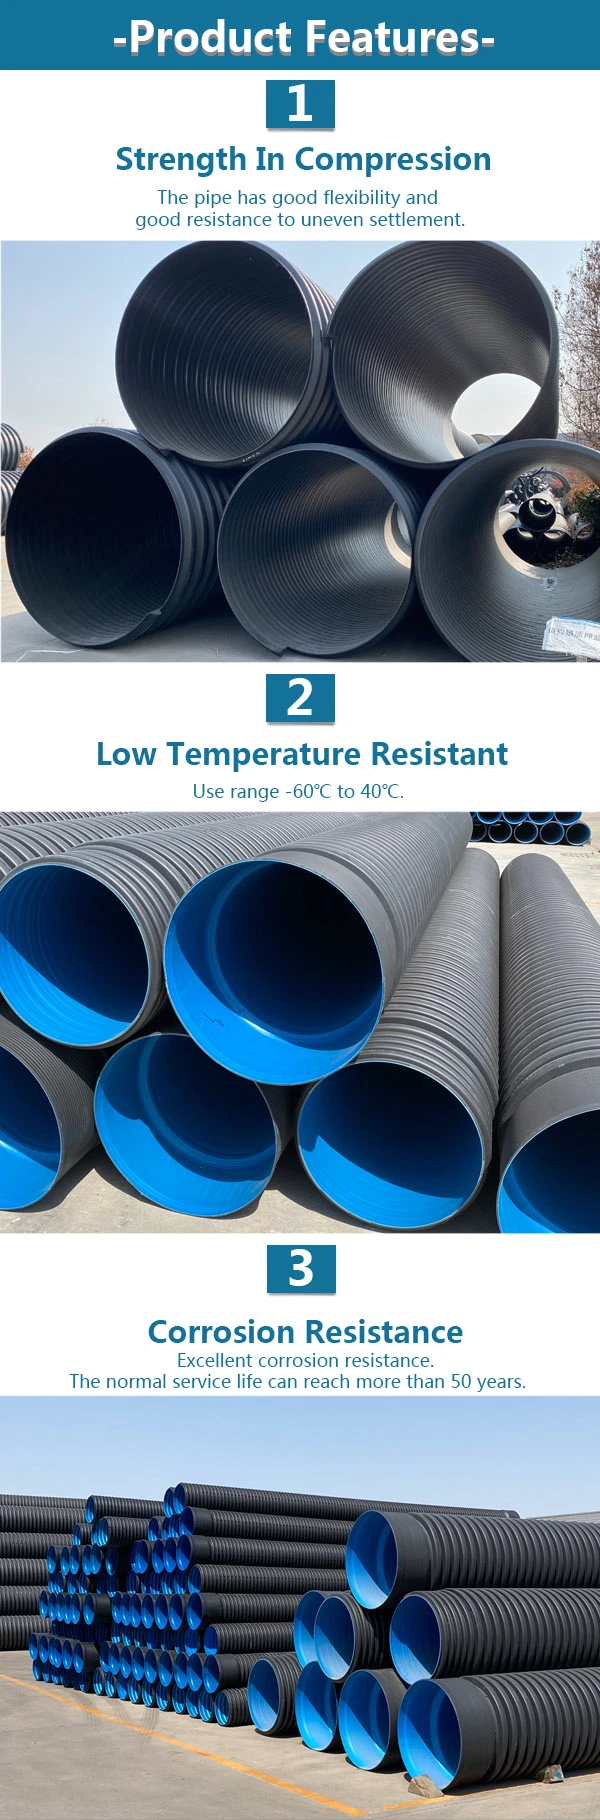 High-Quality HDPE Double Wall Corrugated Pipe for Drainage Wholesale Price